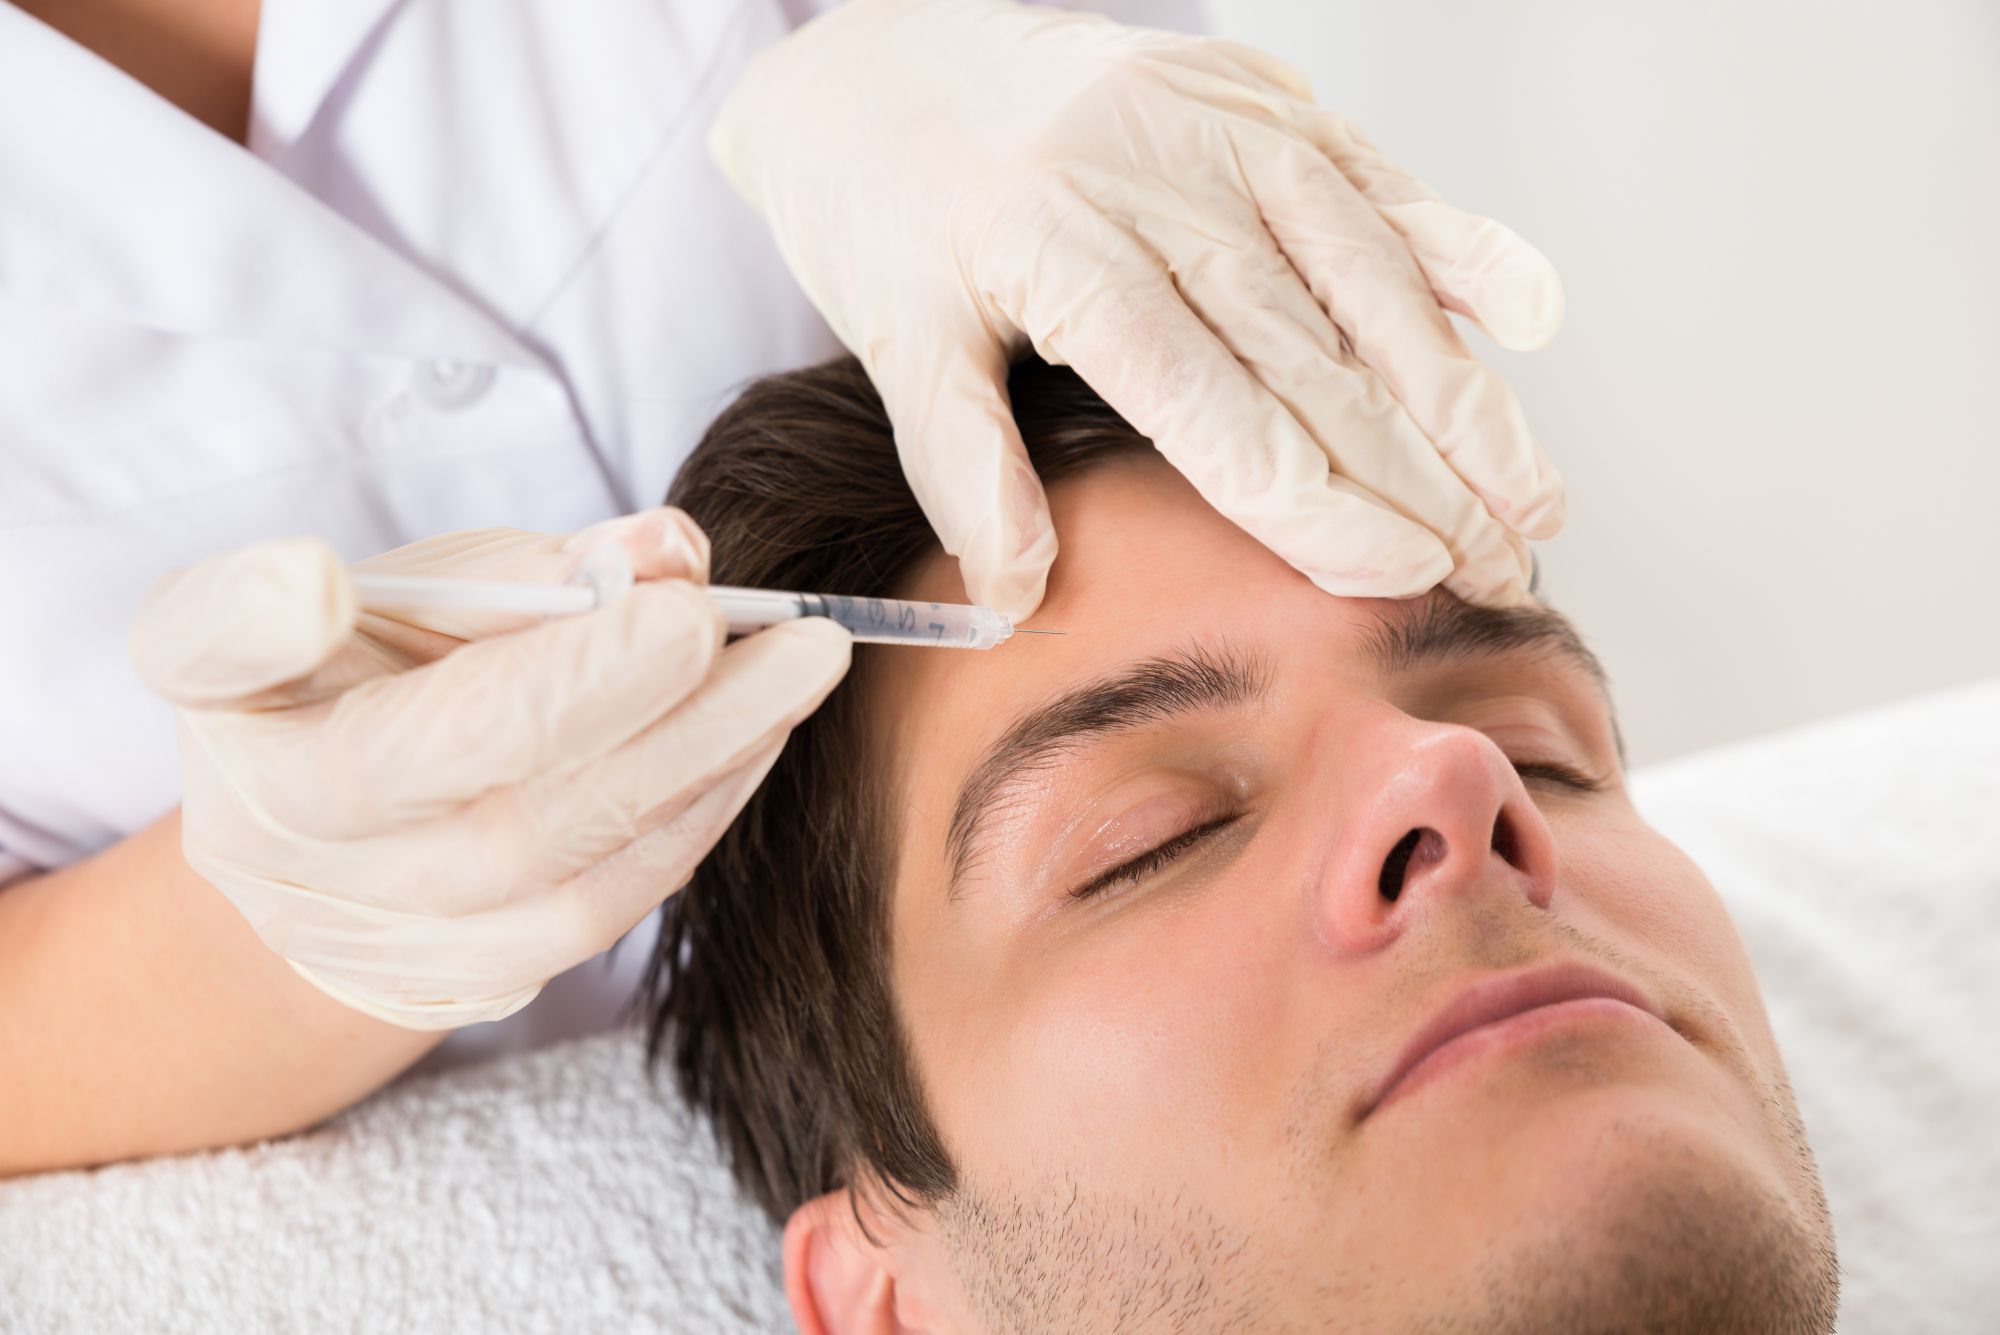 After researching the lying down after Botox myth, a young man decides to get a Botox treatment.